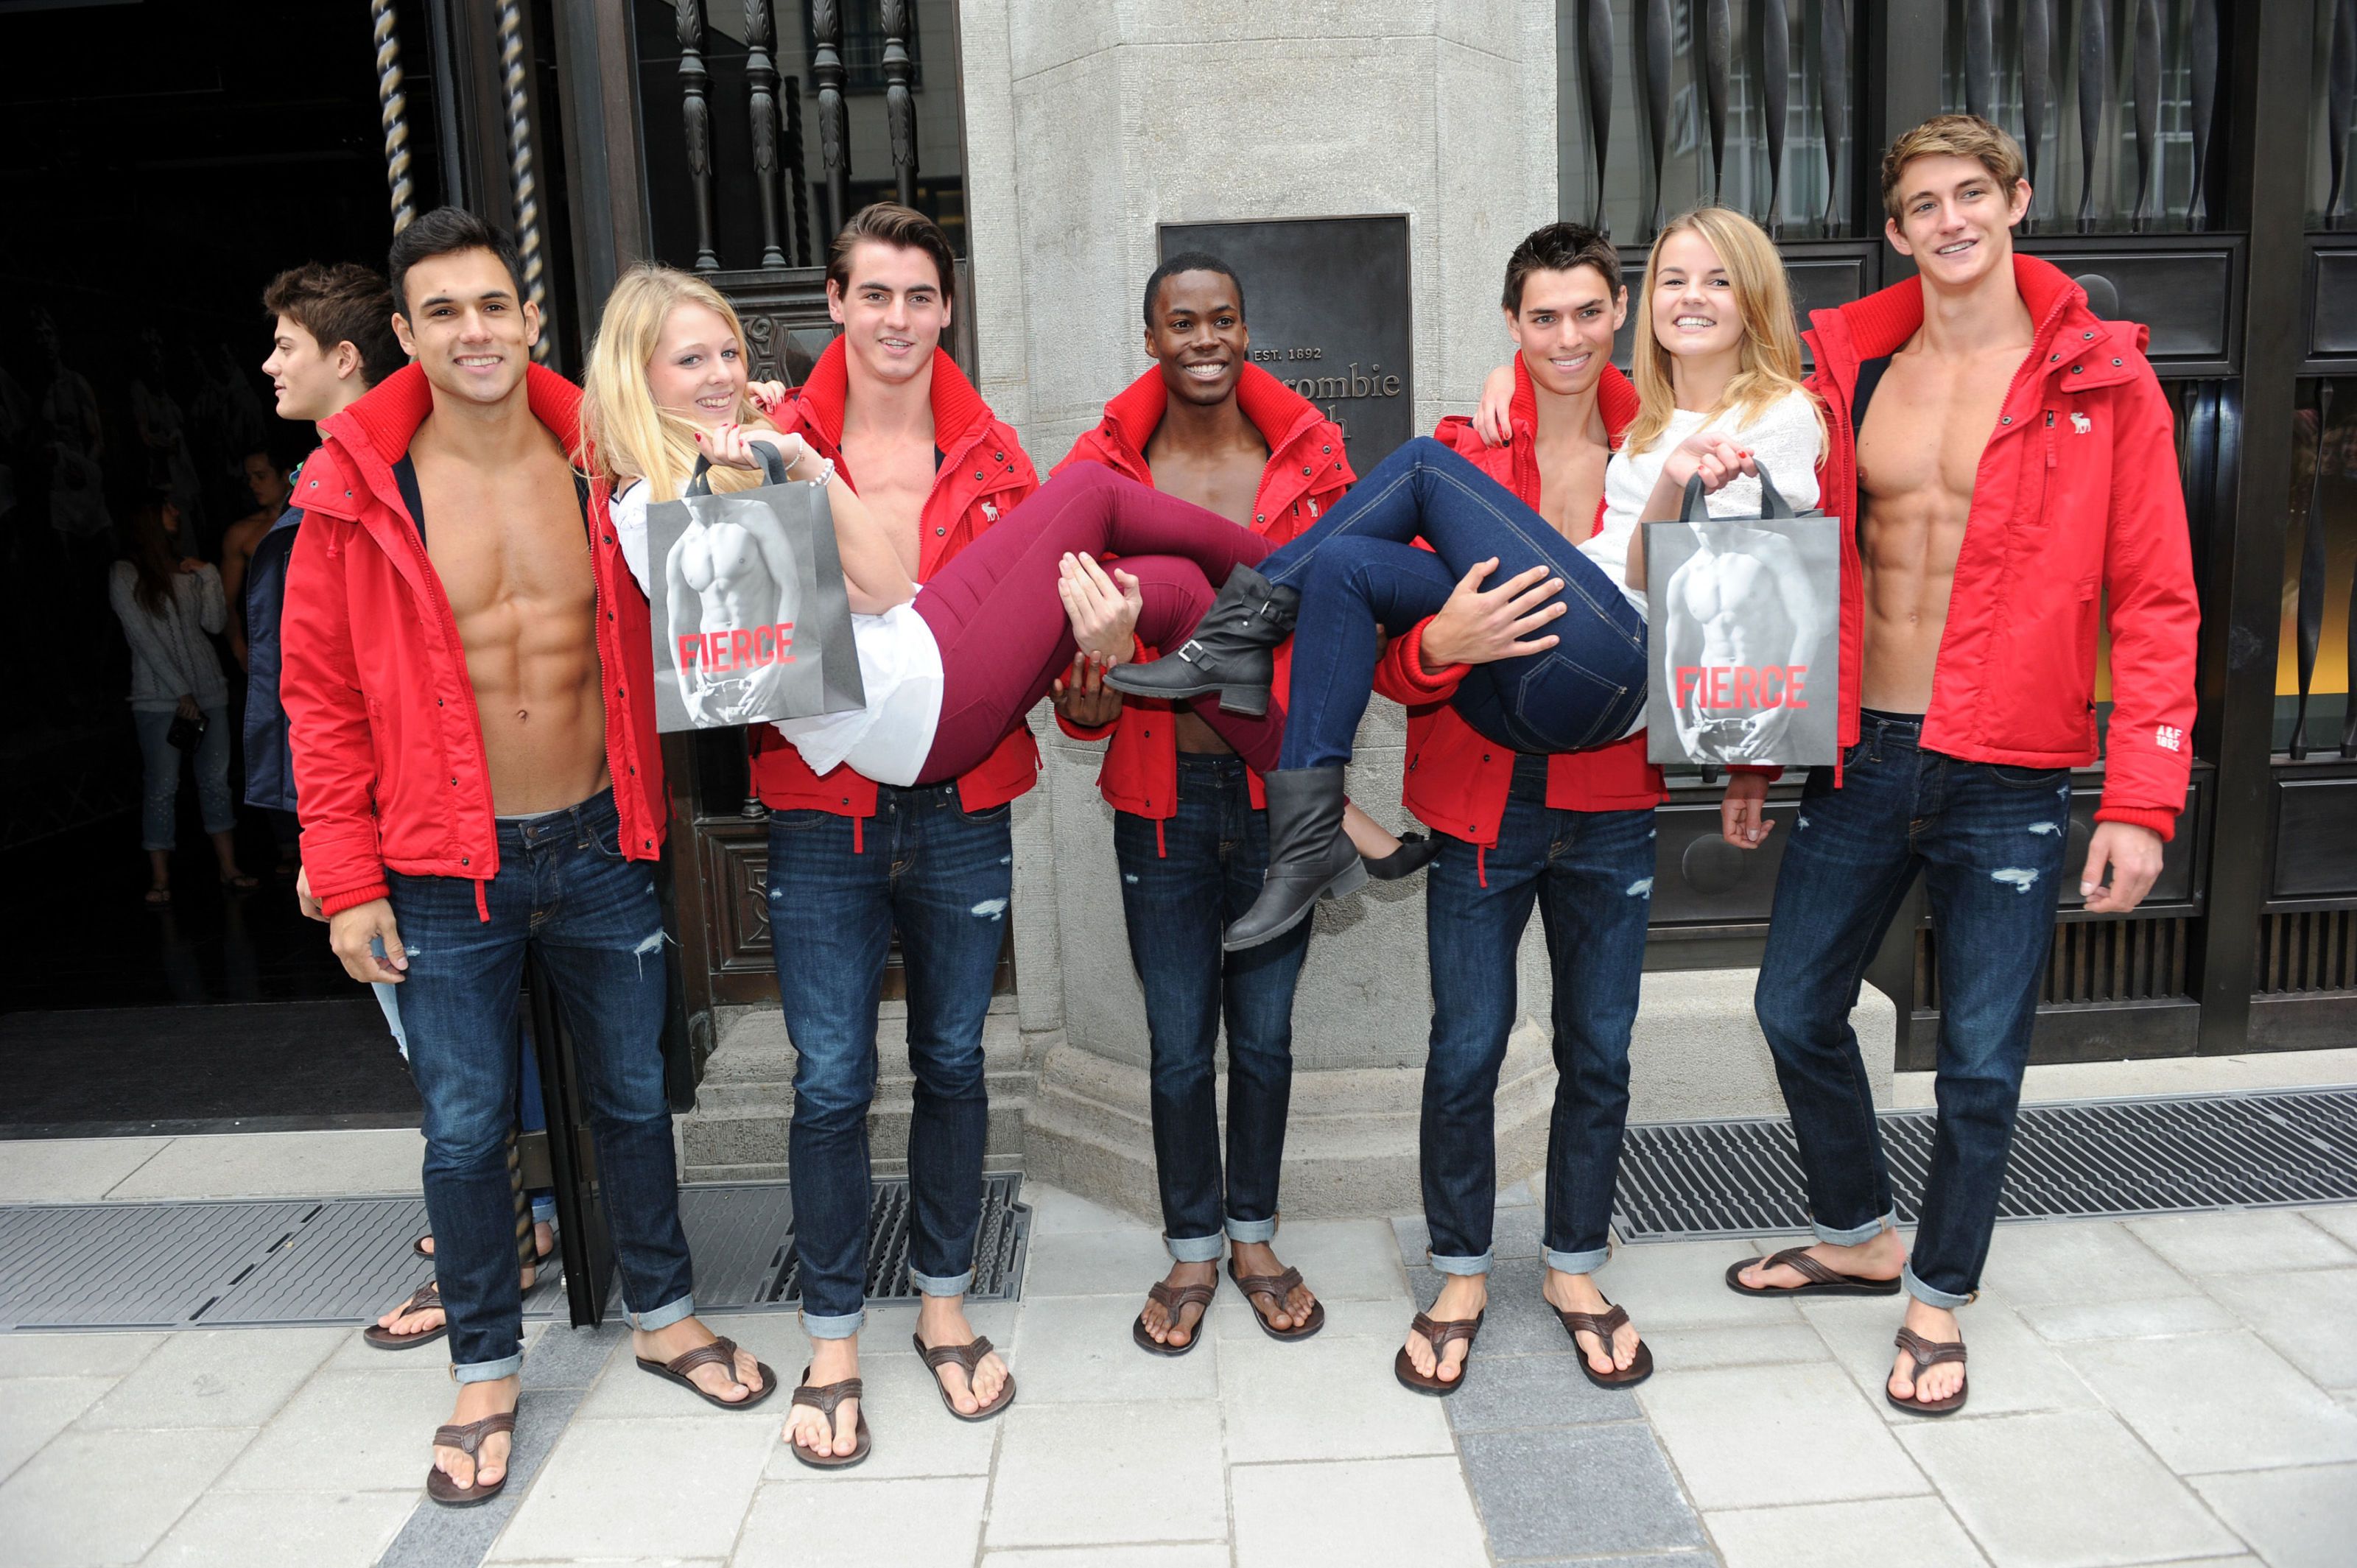 abercrombie and fitch employee discount